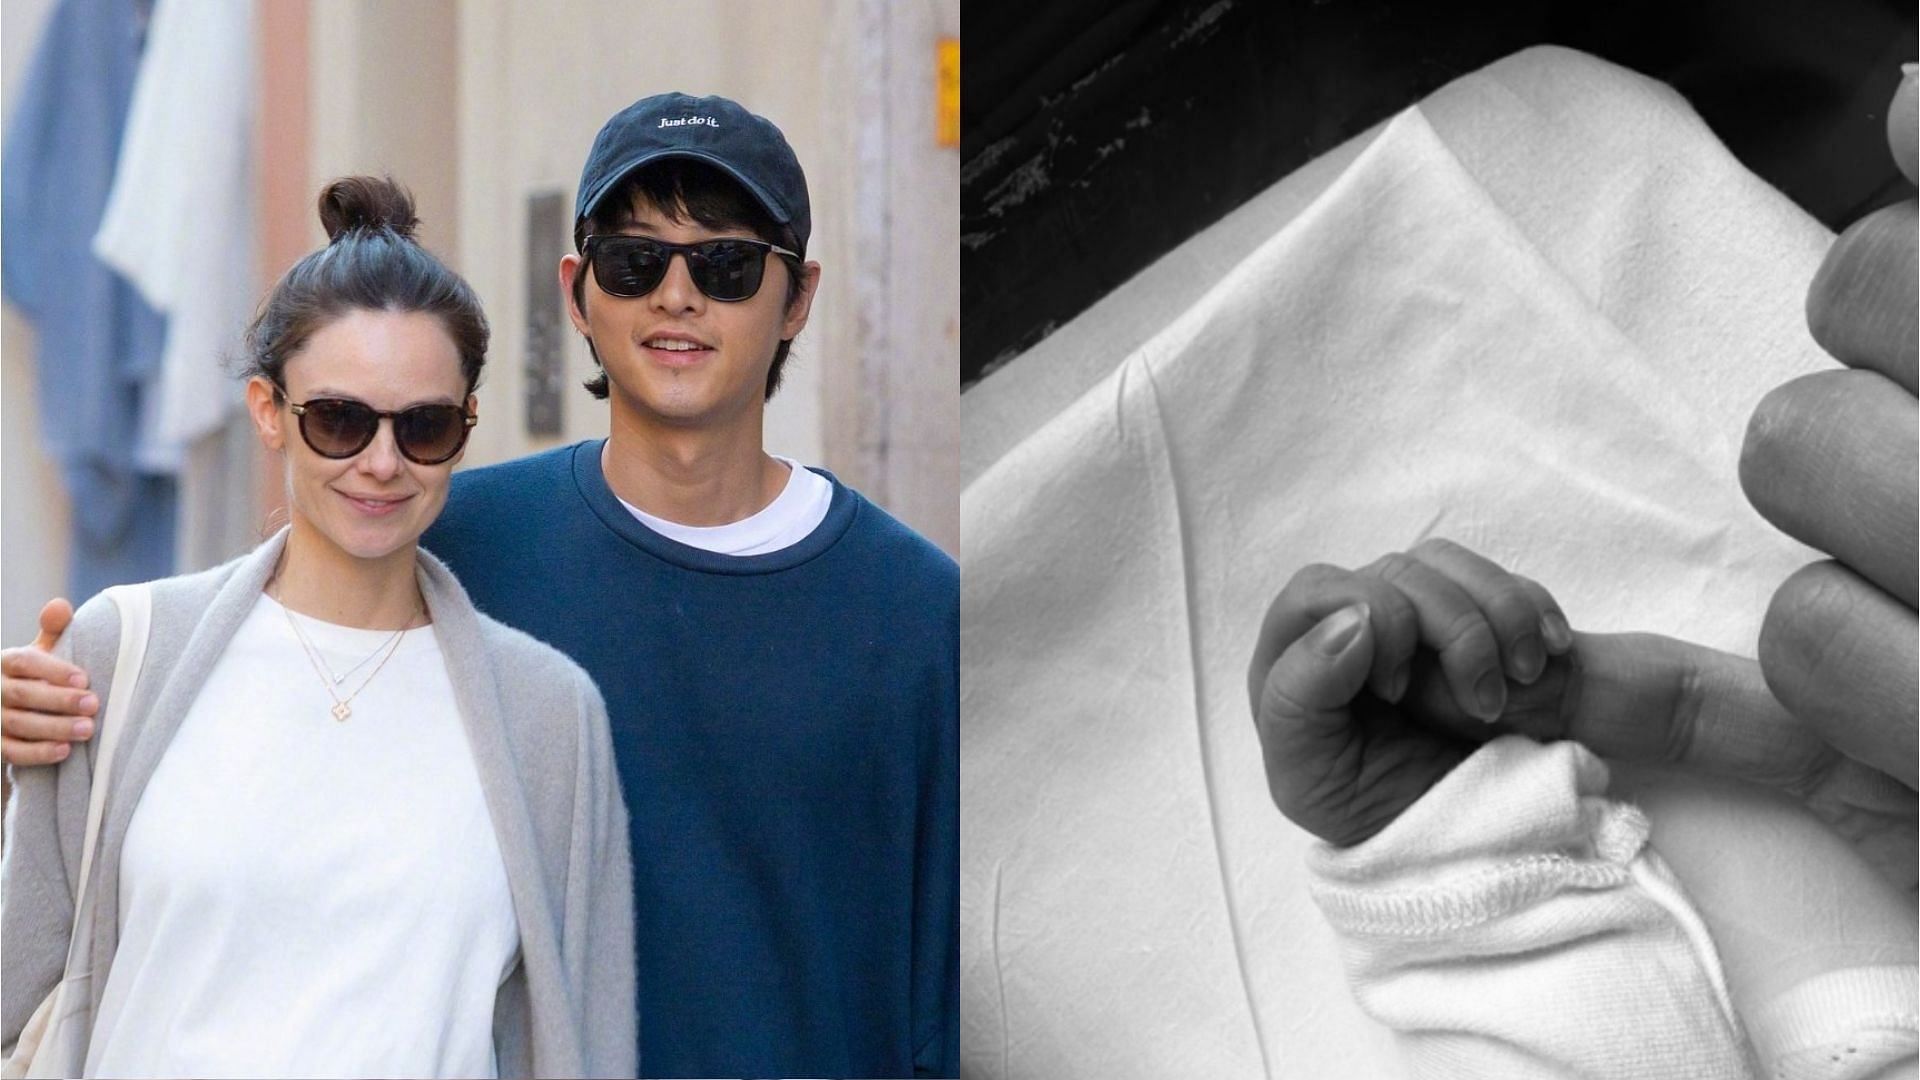 Song Joong-ki gets criticized for his comments about being a father in the Korean entertainment industry (Images via Twitter/hityouwidthatd4 and vincensus)